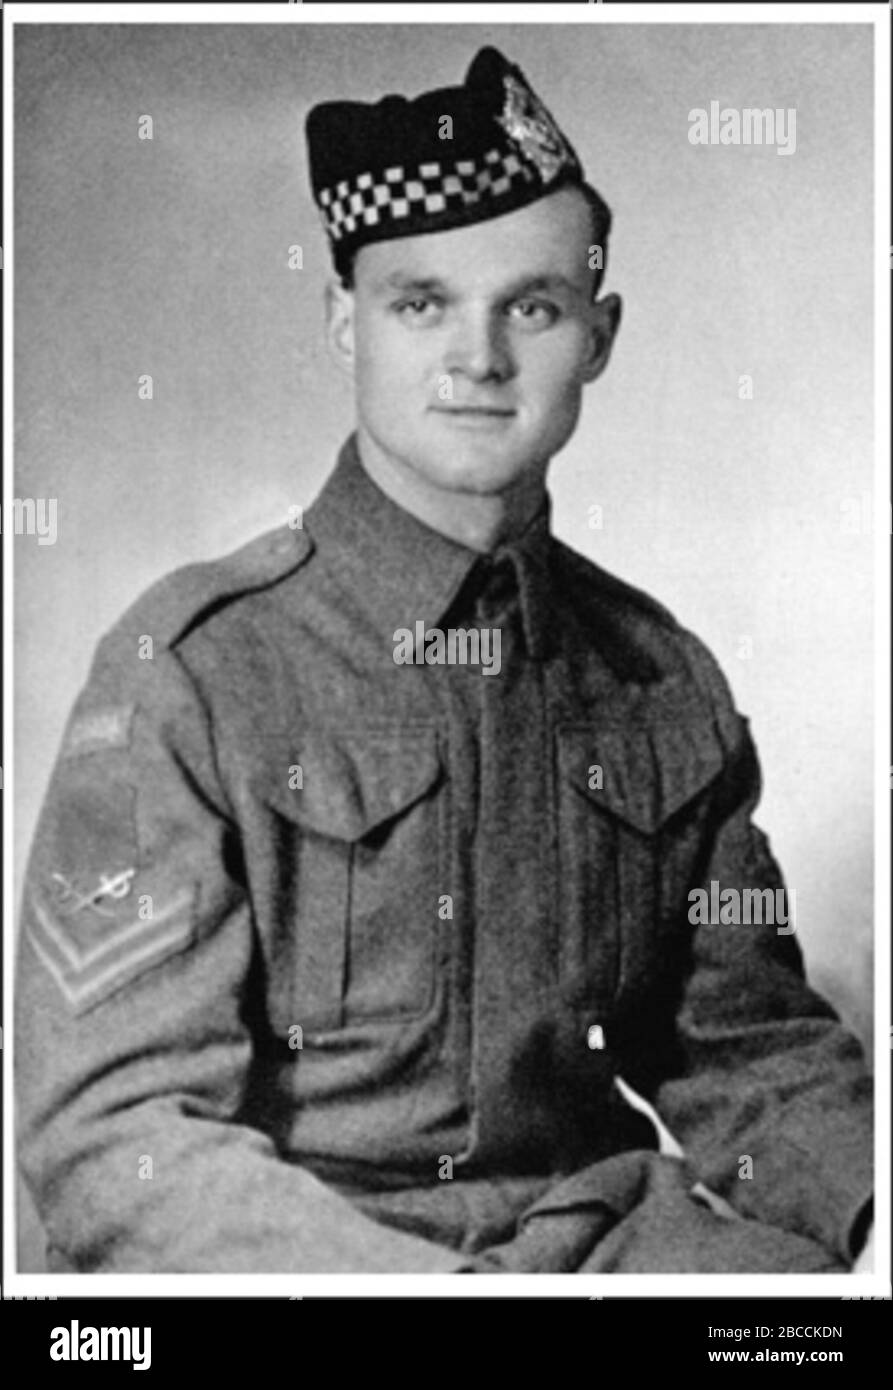 'English: Aubrey Cosens VC Français : Aubrey Cosens VC; Unknown dateUnknown date but before his death in 1945; http://www.cmp-cpm.forces.gc.ca/dhh-dhp/gal/vcg-gcv/bio/cosens-a-eng.asp; Canadian Government; ' Stock Photo